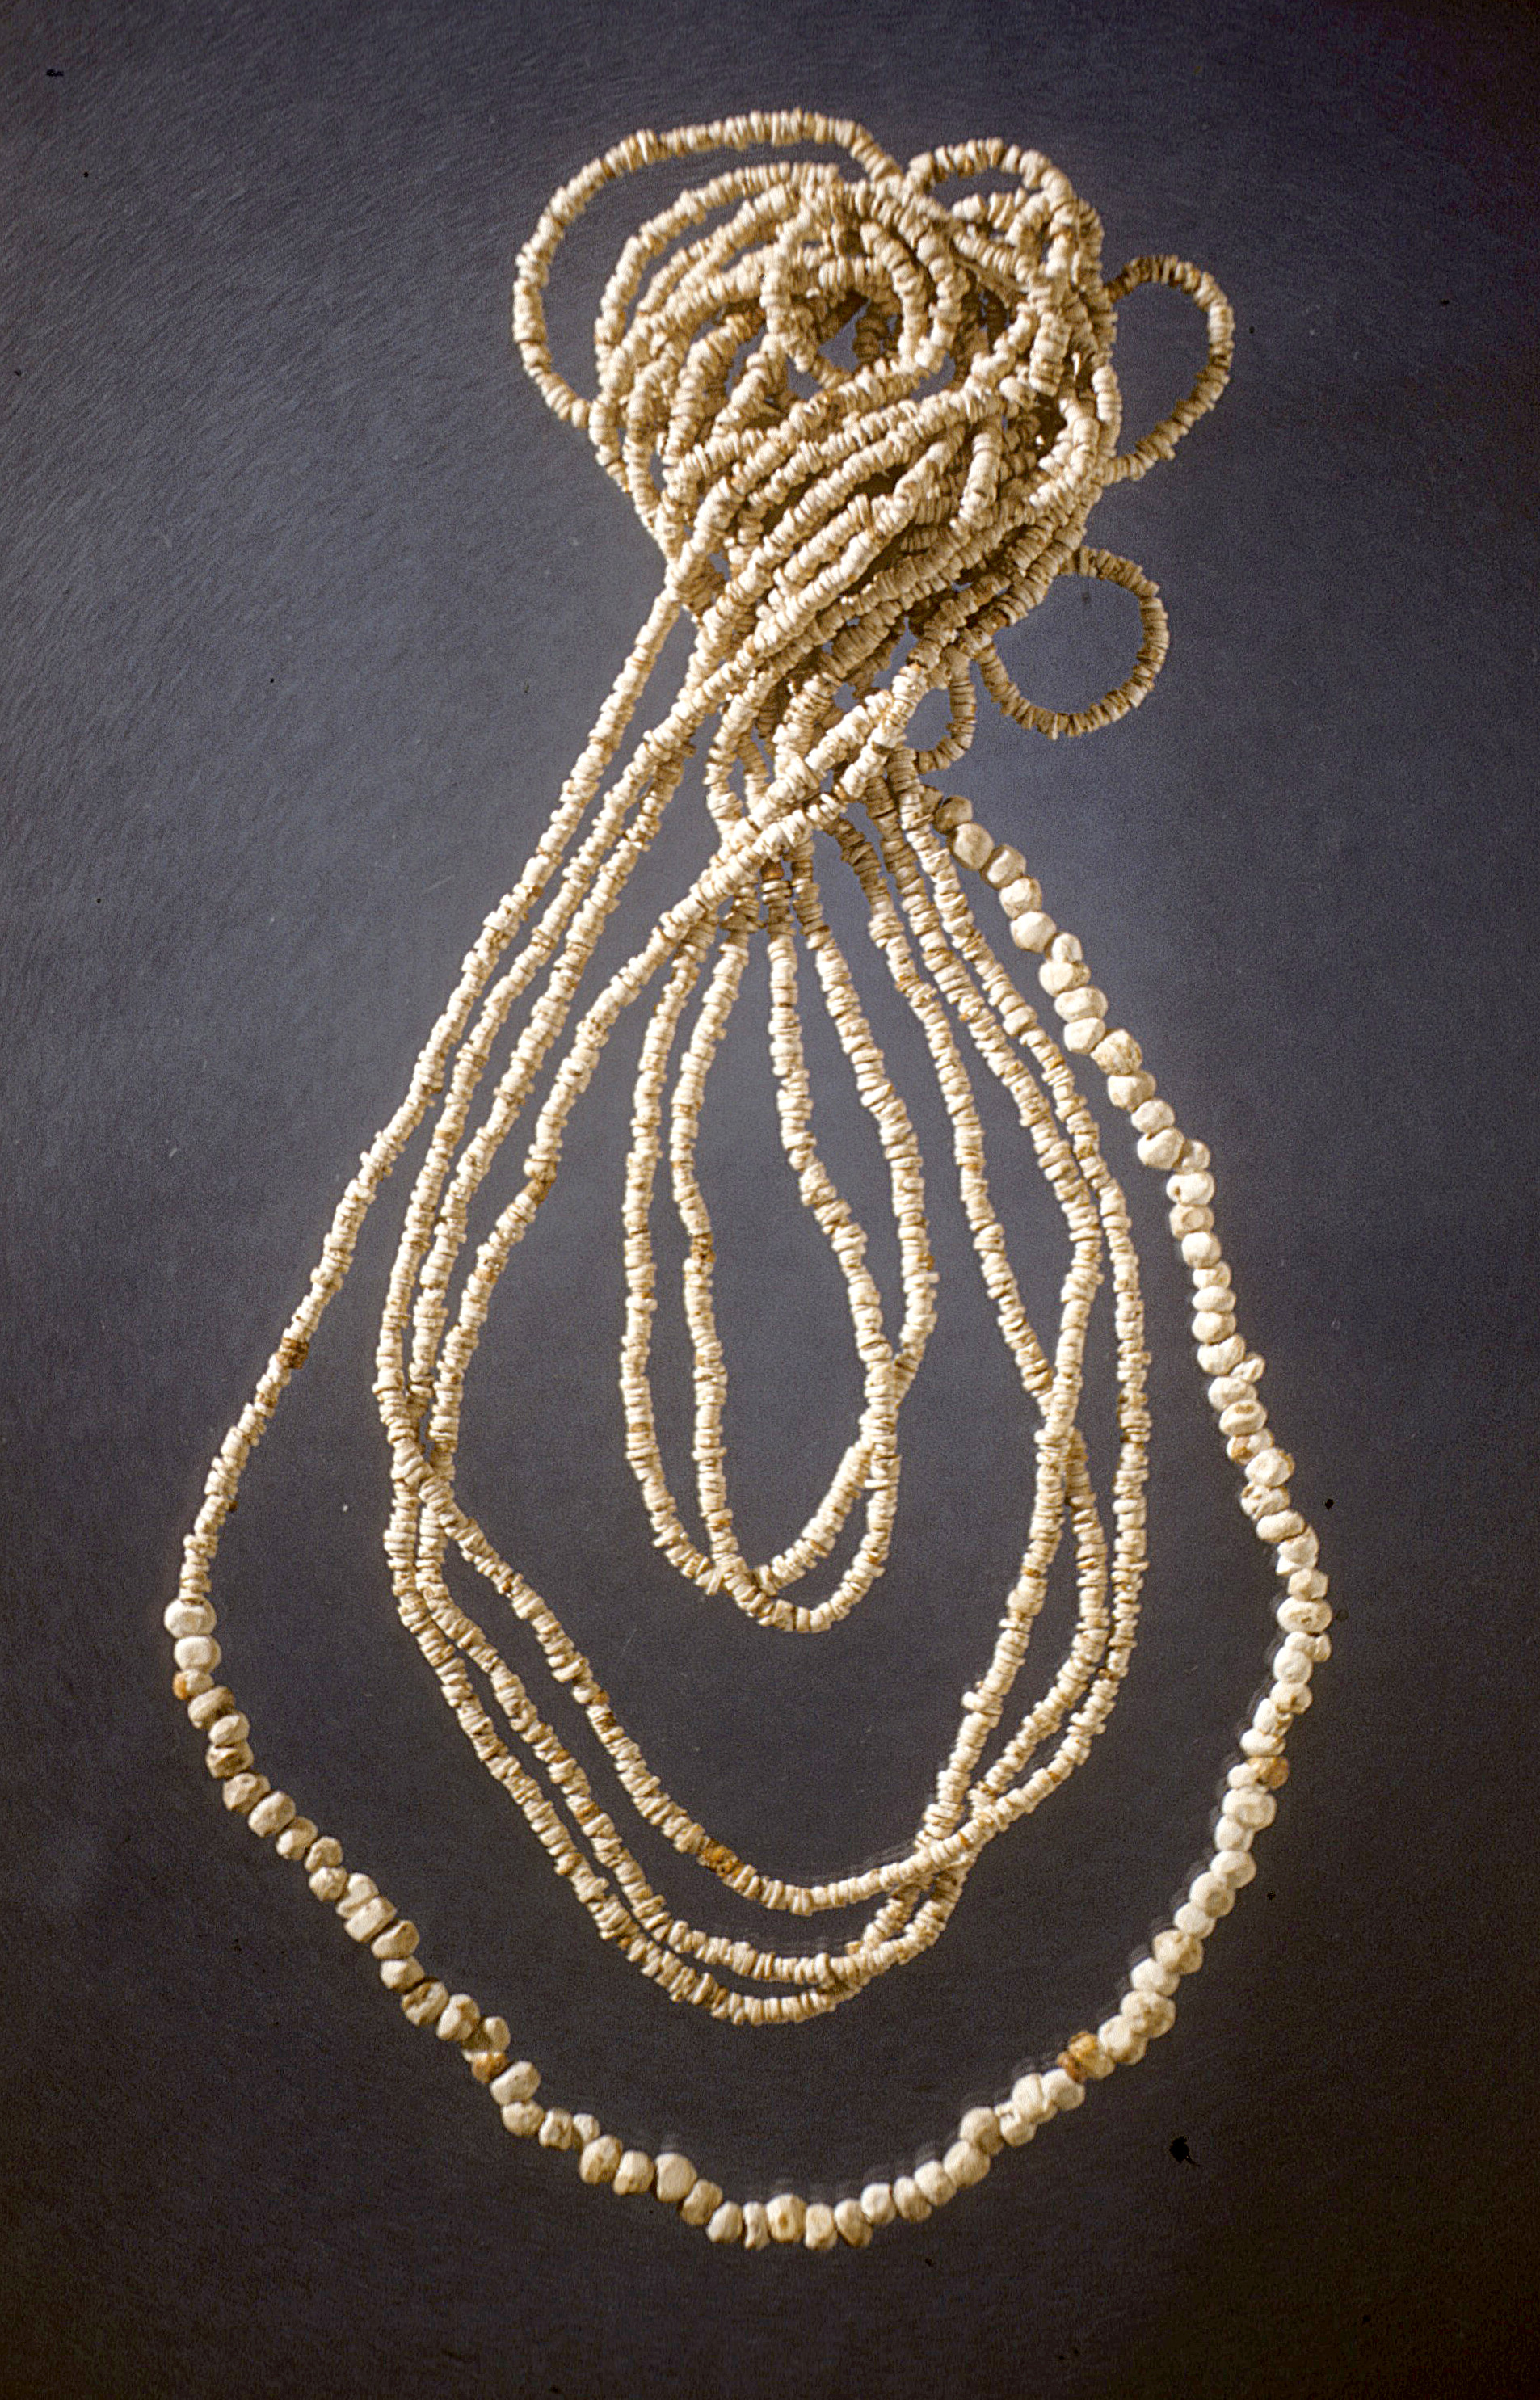 Shell beads found during the 1941 WPA excavations.